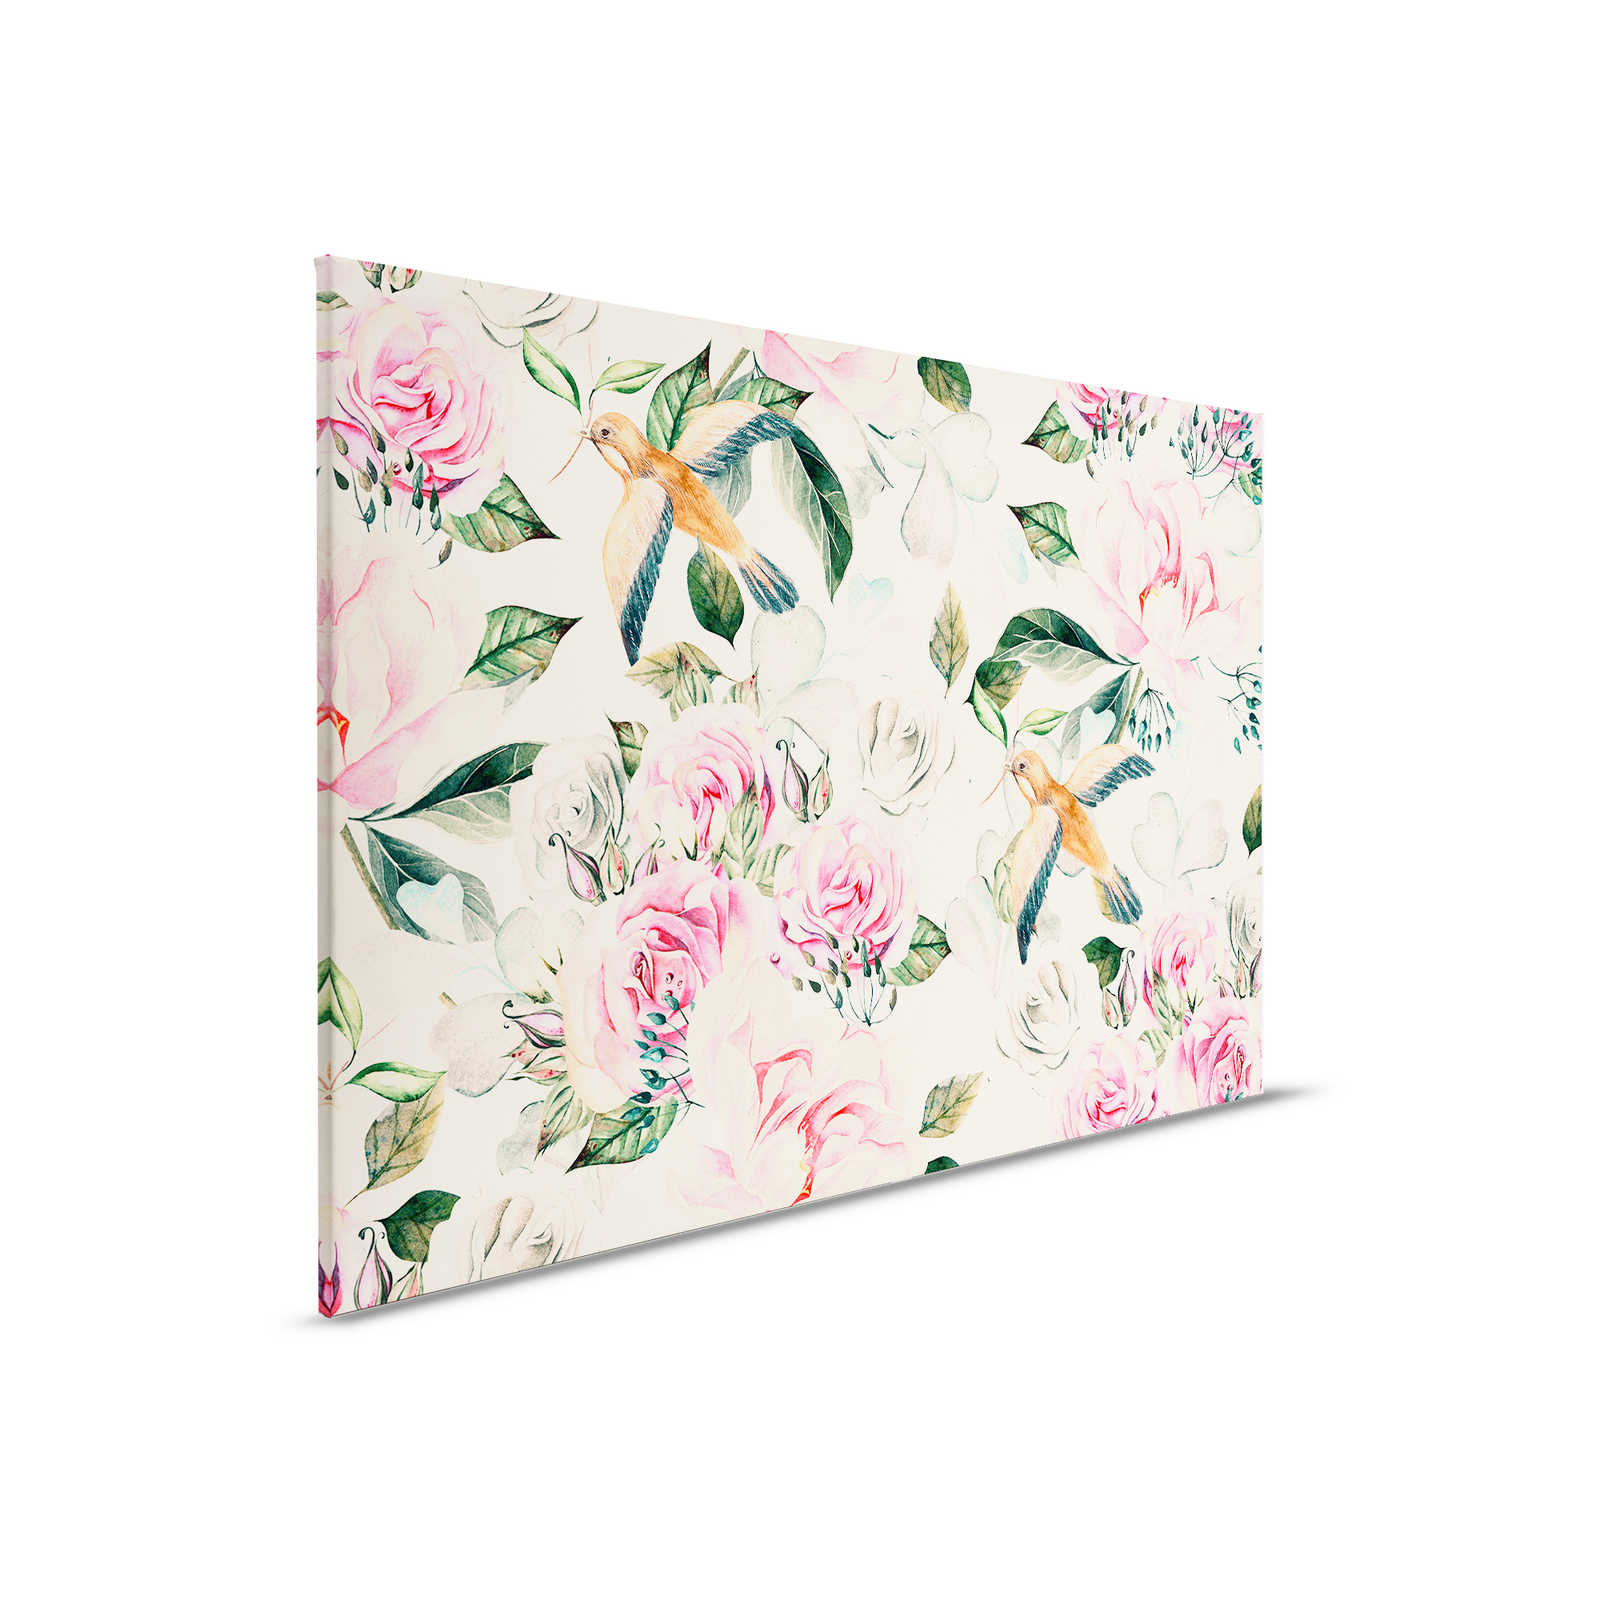 Vintage Style Canvas with Playful Flowers and Birds - 0.90 m x 0.60 m
